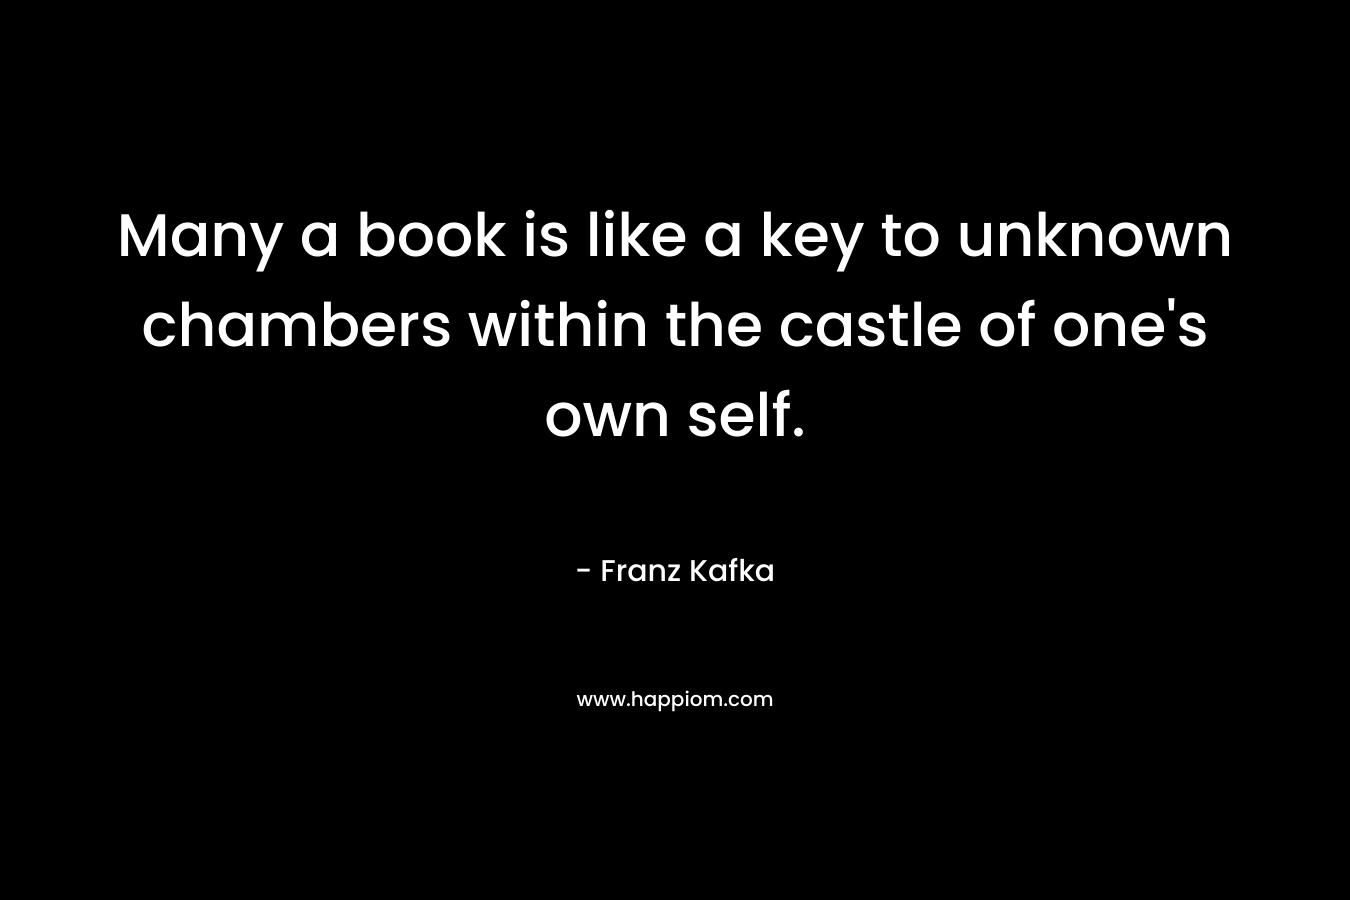 Many a book is like a key to unknown chambers within the castle of one's own self.